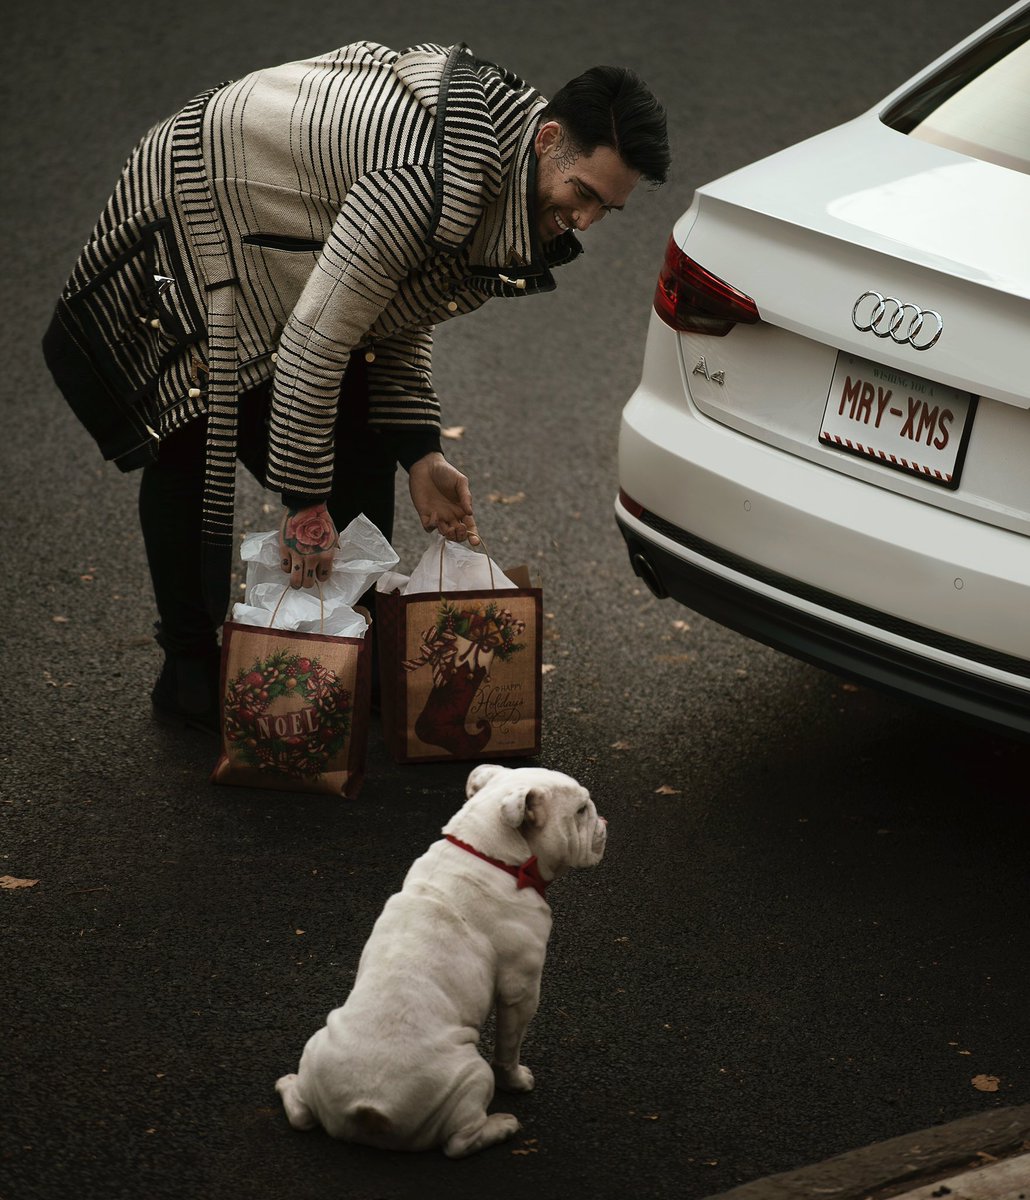 X-mas traditions, like packing up the car the night before are always a bit nicer, when @Audi lends a hand with the delivery #audipartner